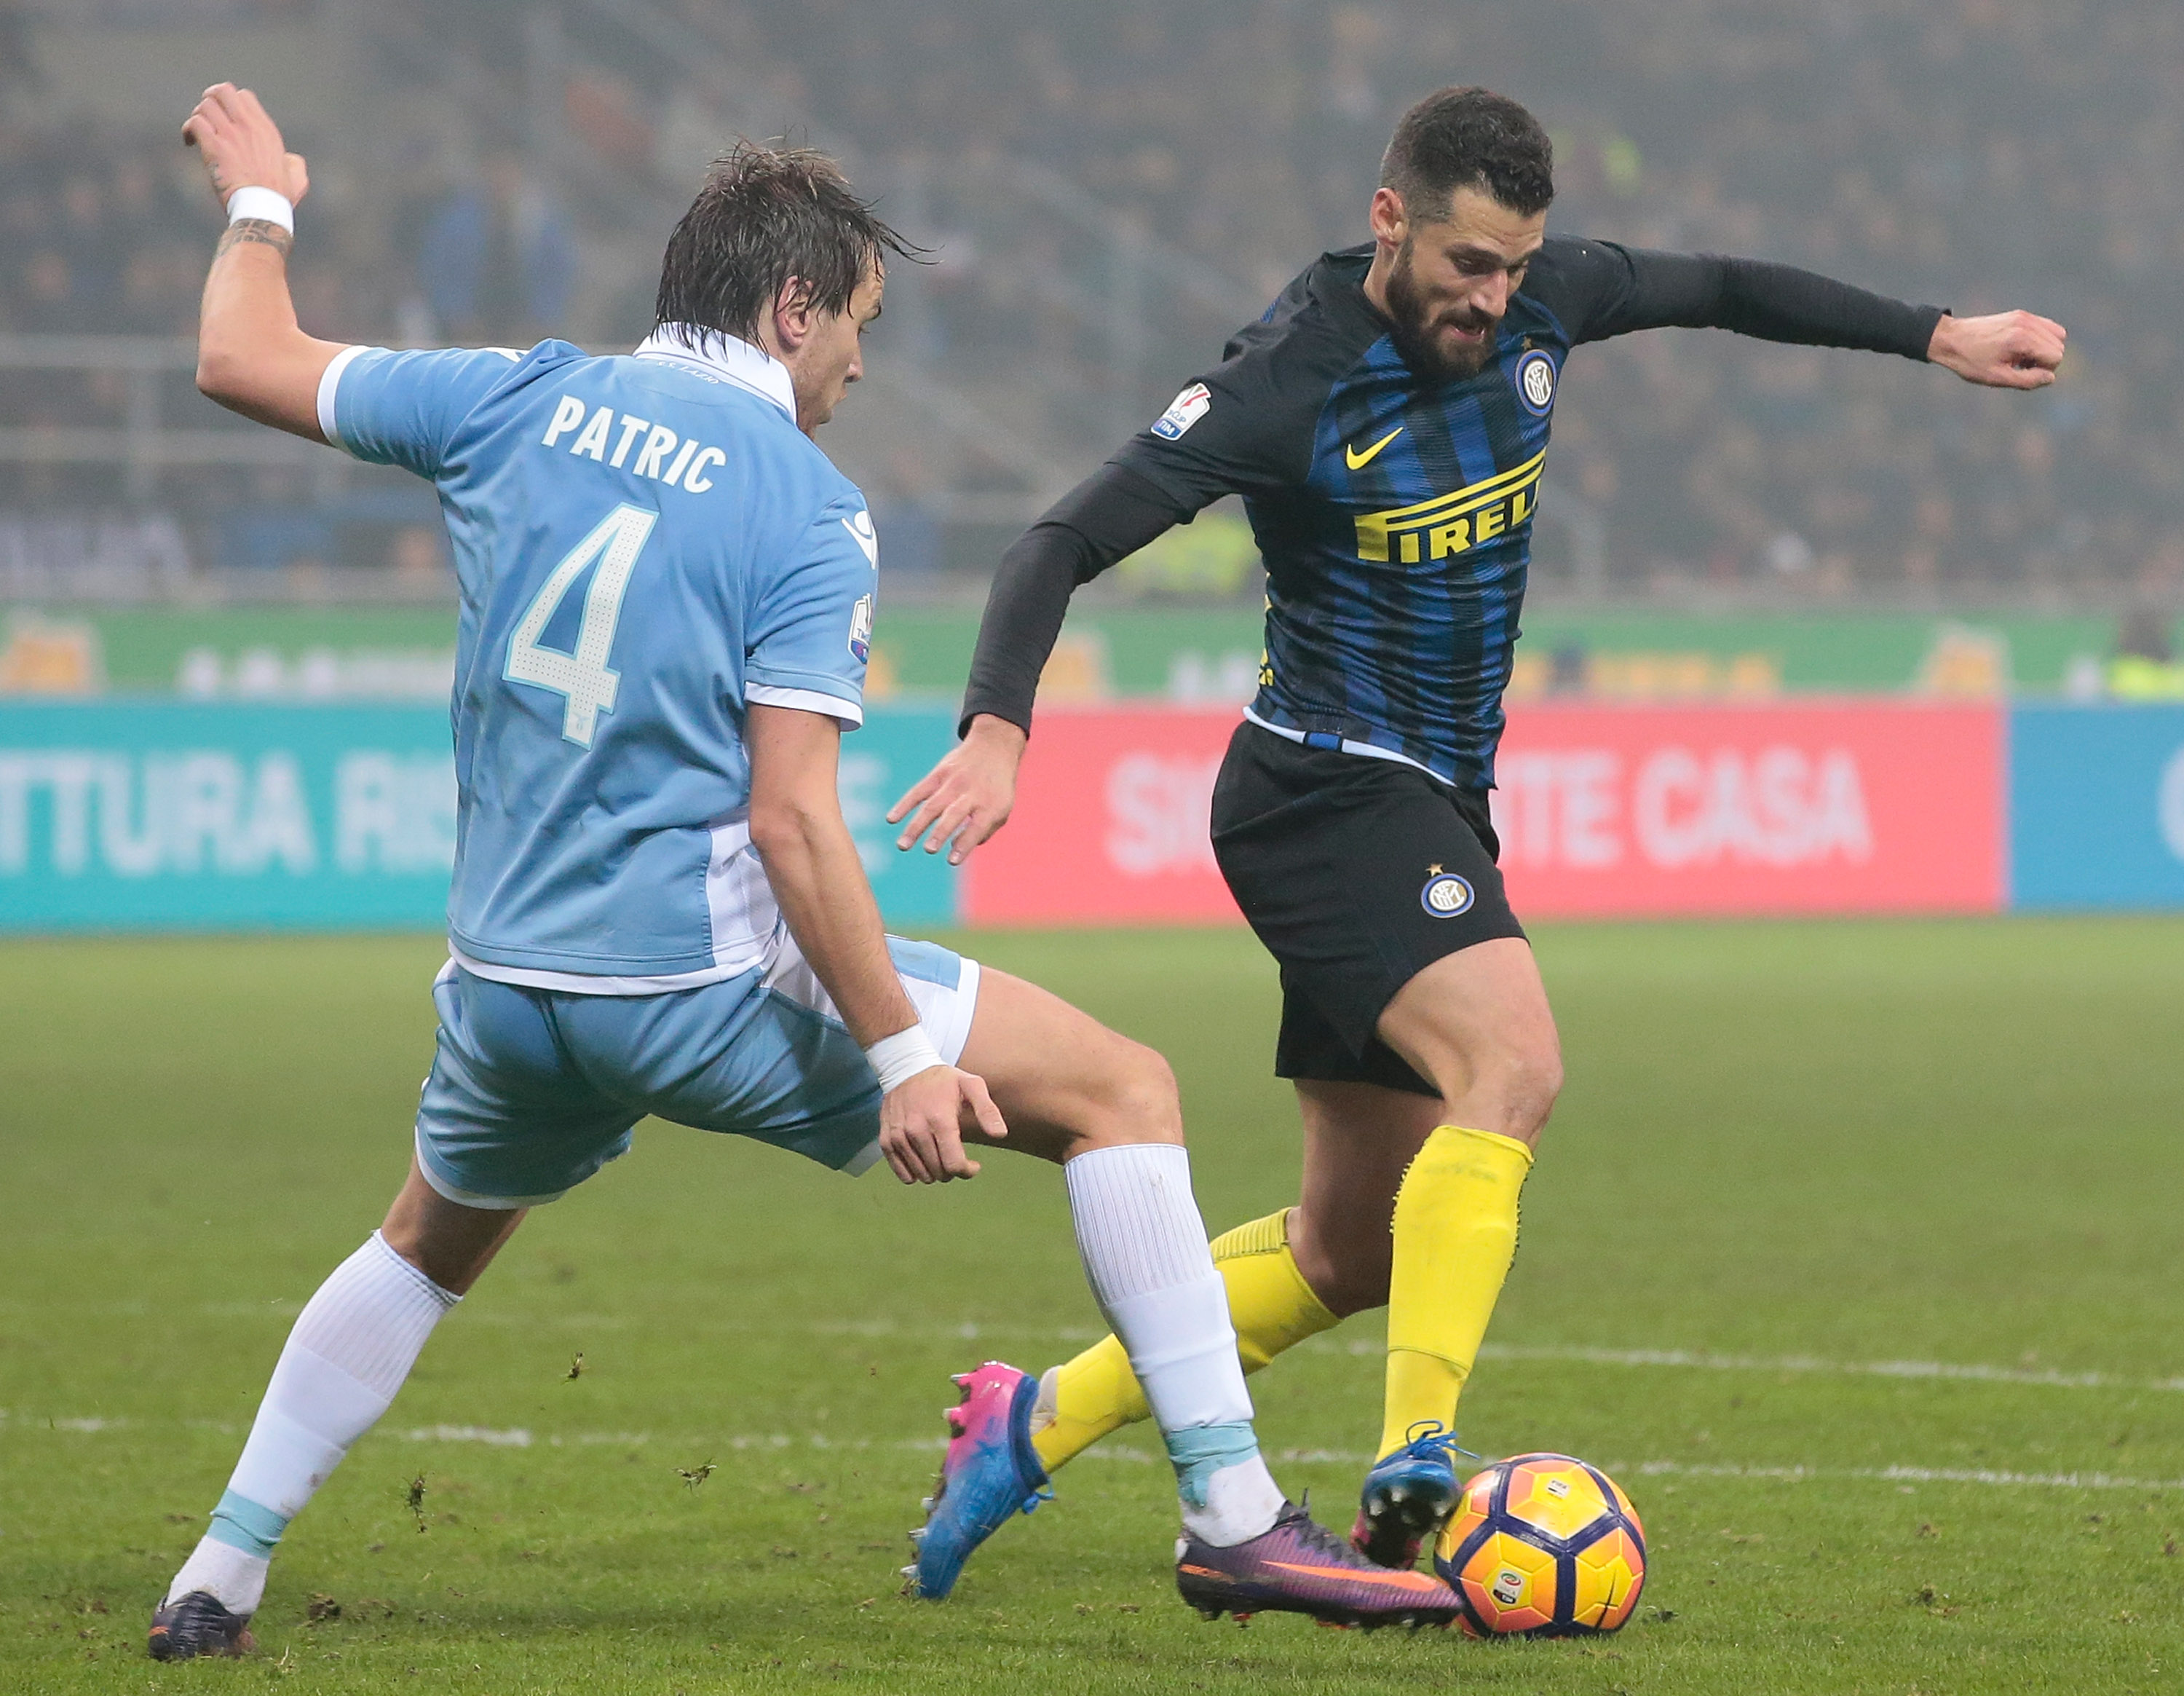 MILAN, ITALY - JANUARY 31: Antonio Candreva of FC Internazionale Milano (R) competes for the ball with Patricio Gabarron Gil of SS Lazio during the TIM Cup match between FC Internazionale and SS Lazio at Stadio Giuseppe Meazza on January 31, 2017 in Milan, Italy.  (Photo by Emilio Andreoli/Getty Images)